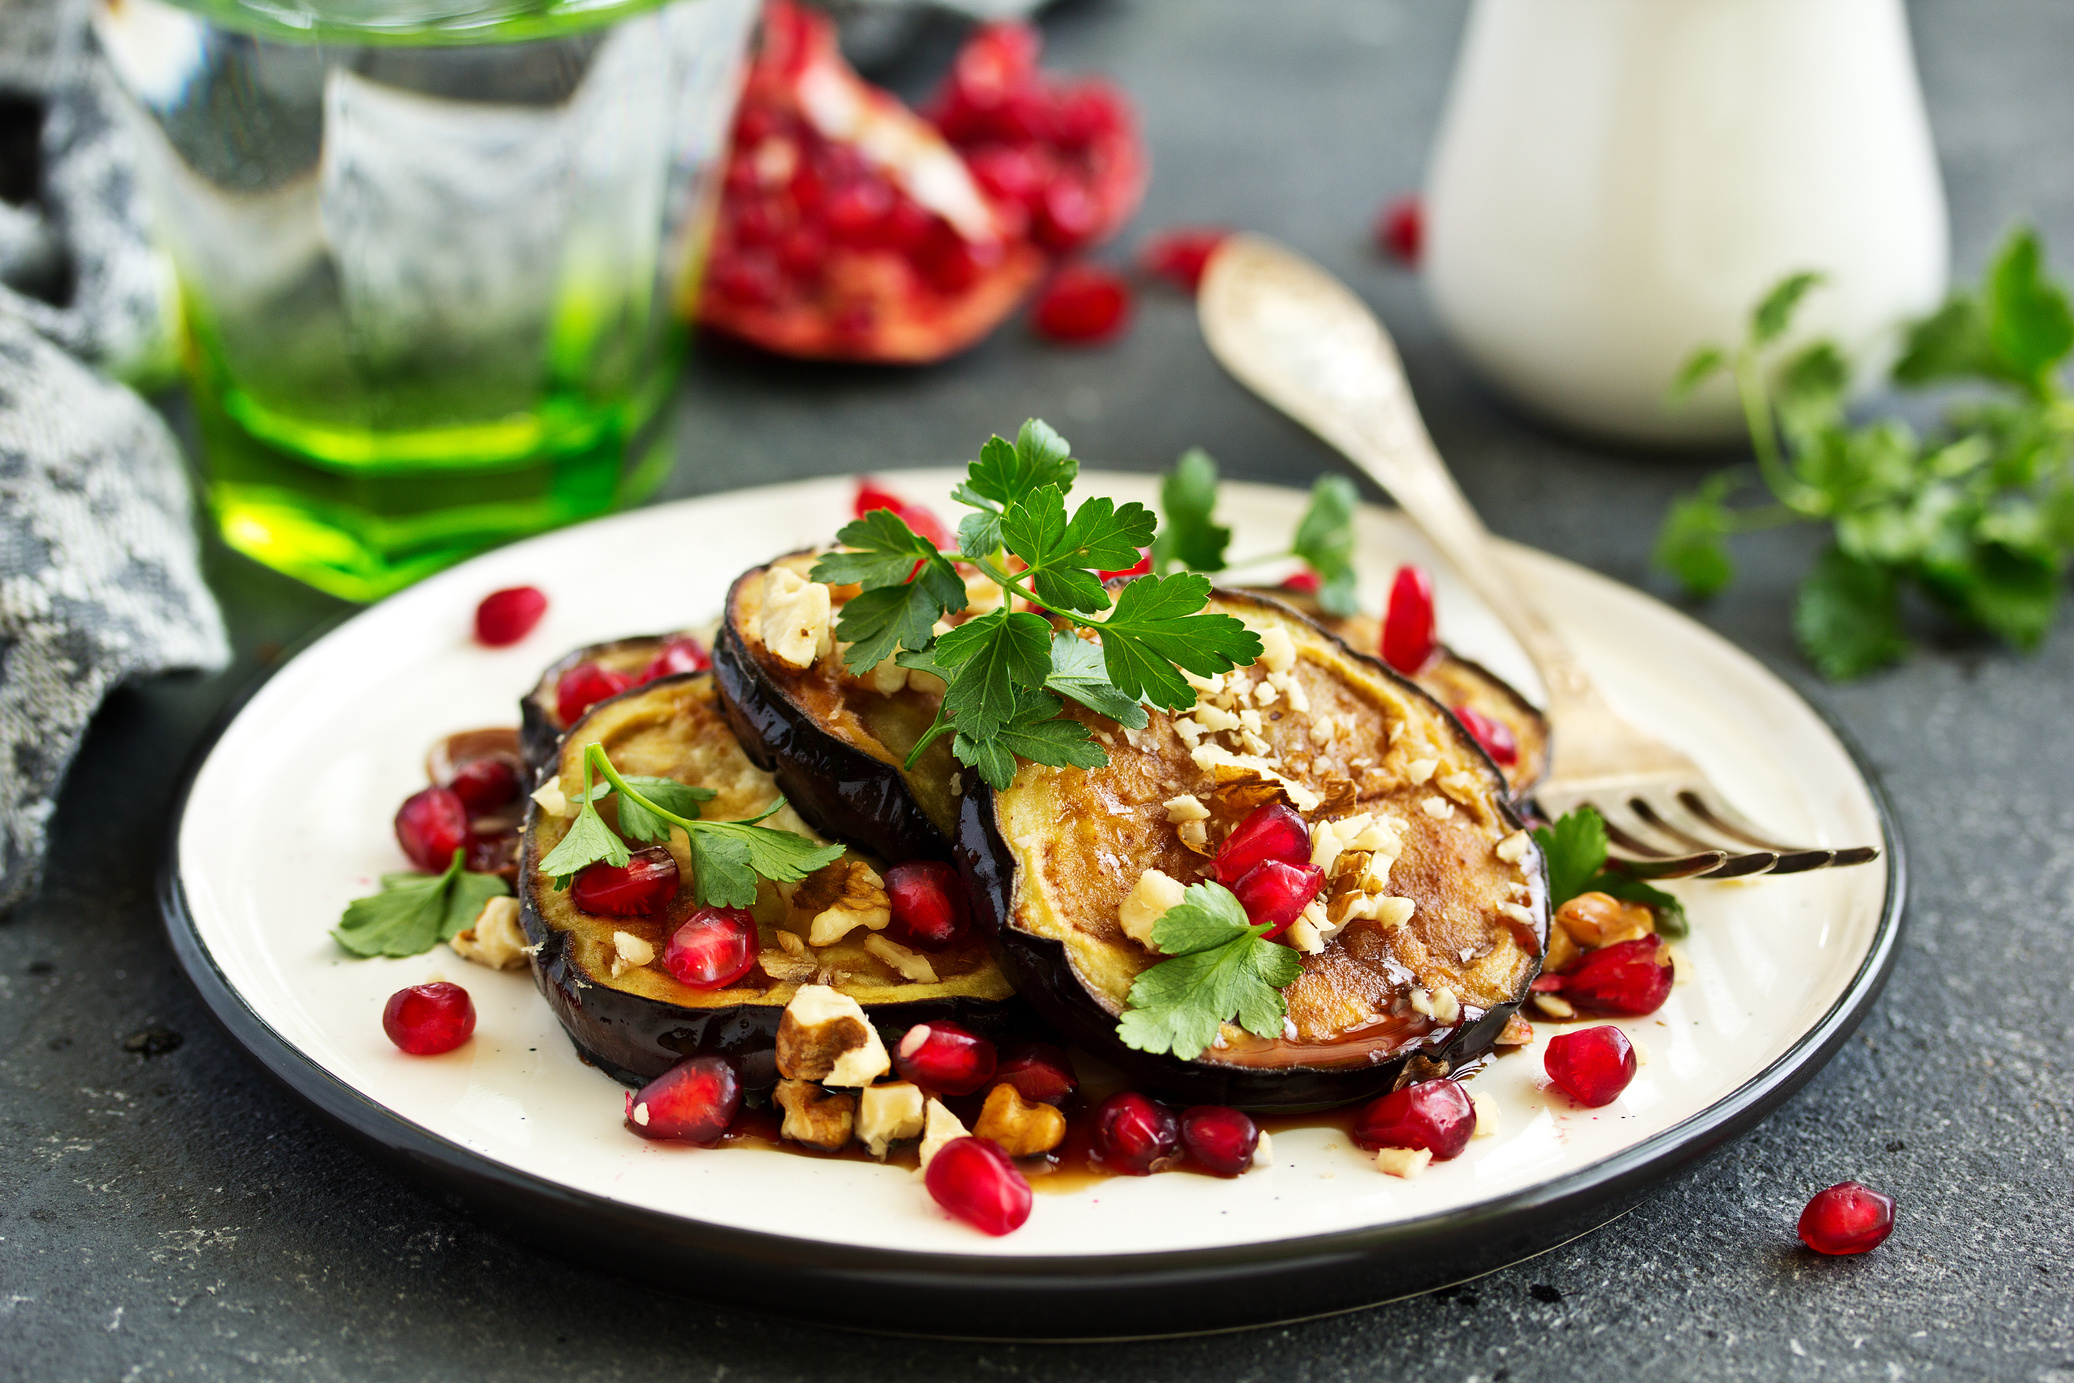 Fried eggplants with pomegranate sauce and nuts.